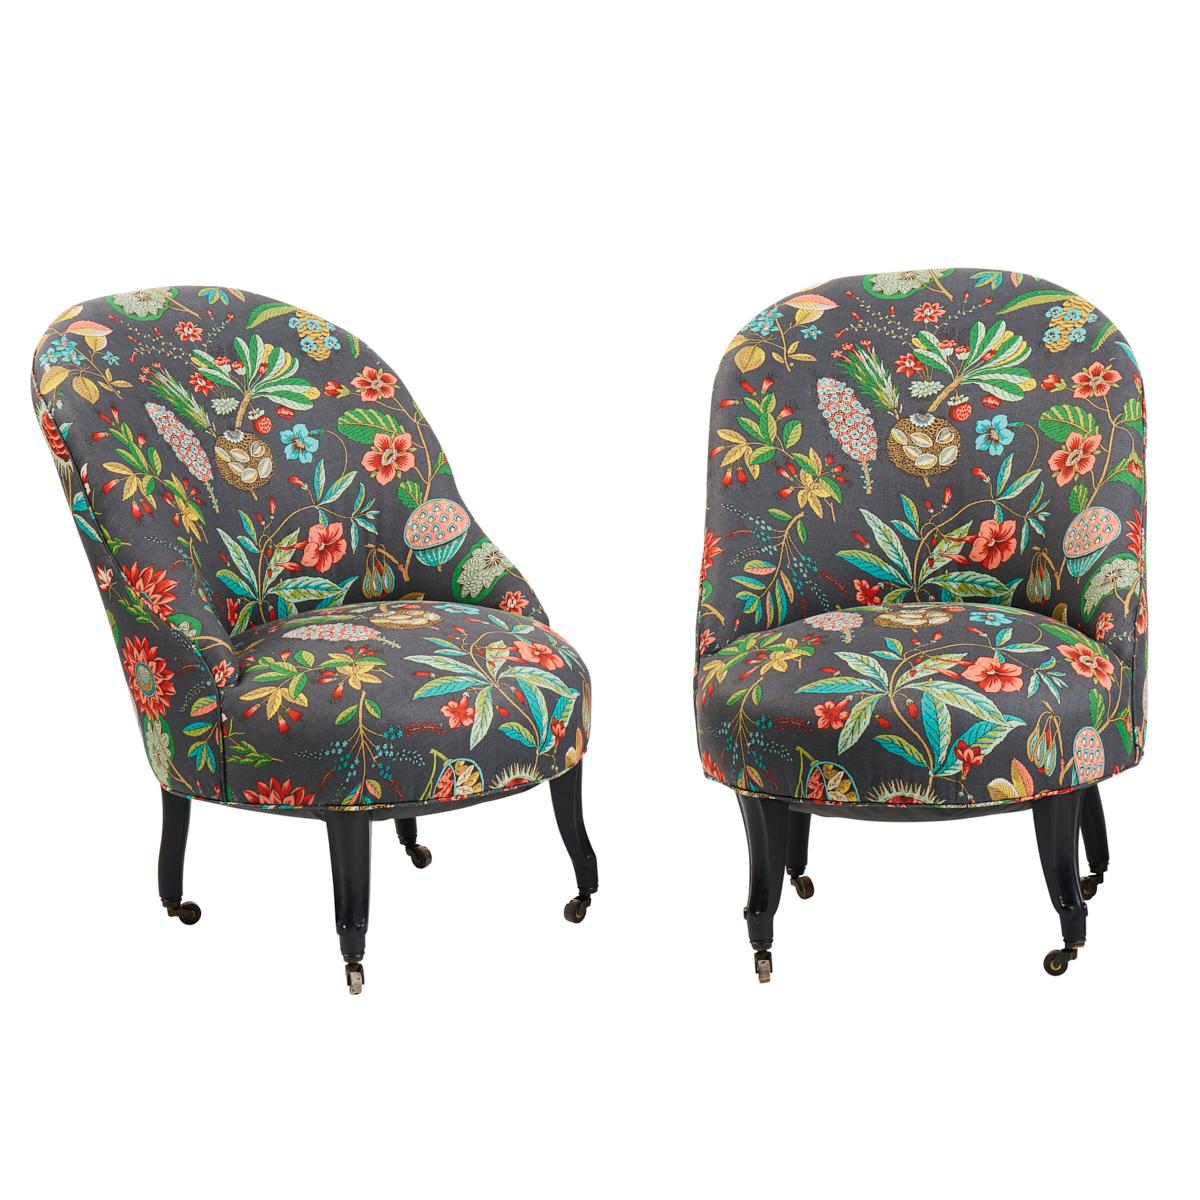 We love the elegant simplicity of this pair of antique Napoleon III slipper chairs, discovered in the South of France and newly upholstered LaRue Stripe fabric in midnight. With high square backs that are perfectly pitched, these gorgeous chairs are